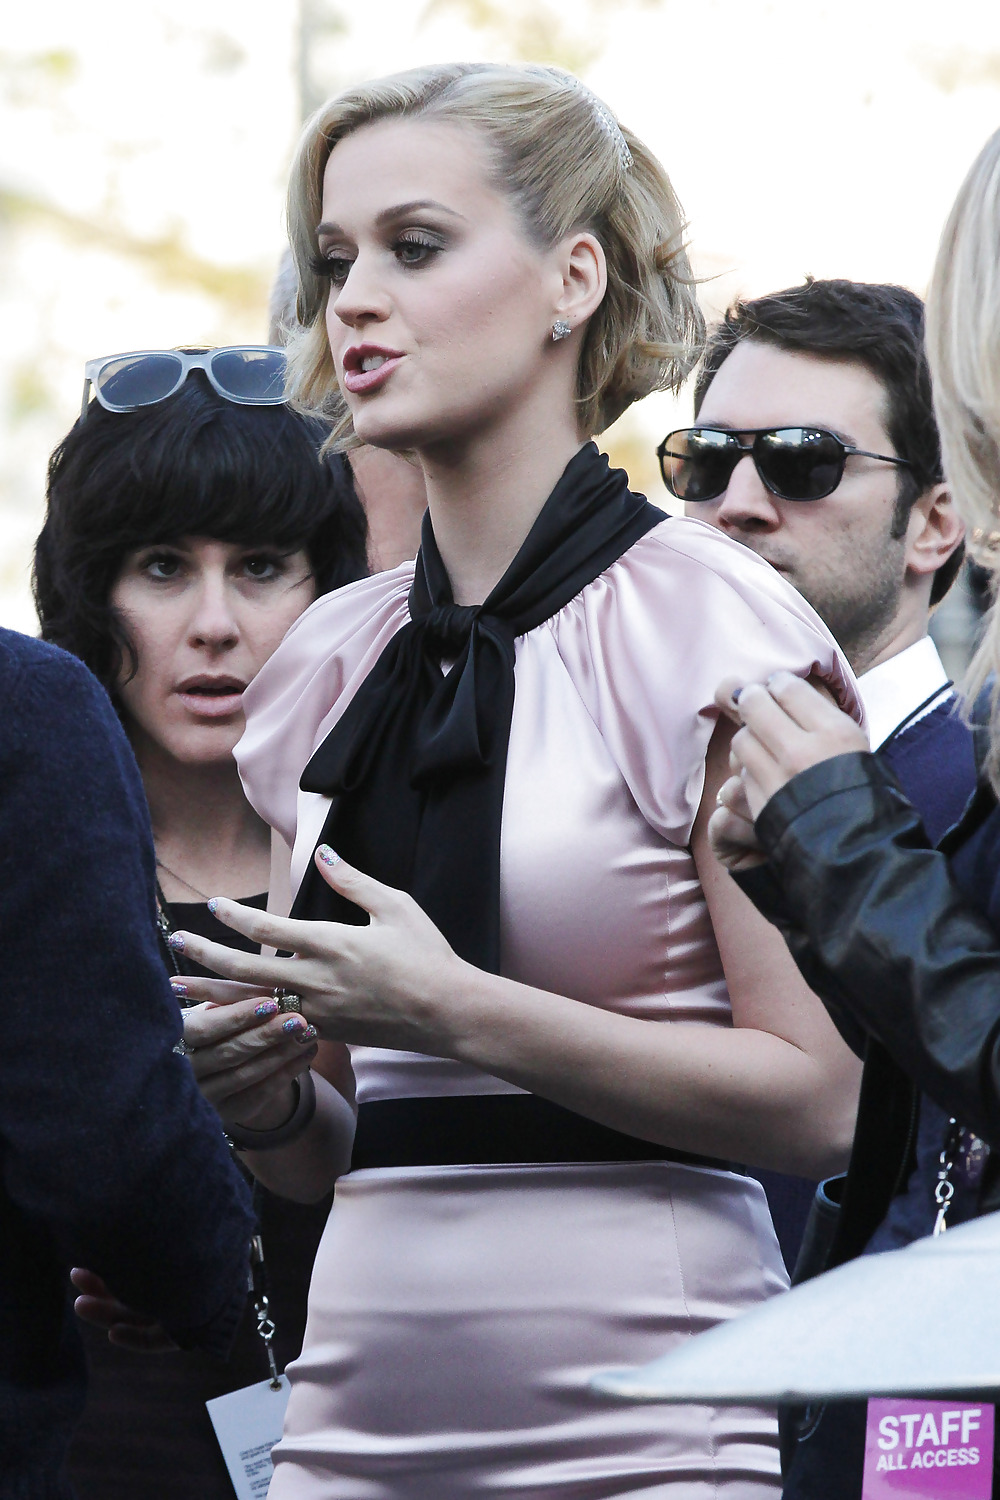 Katy Perry Launch fragrance at Nordstrom in Los Angeles #8682525